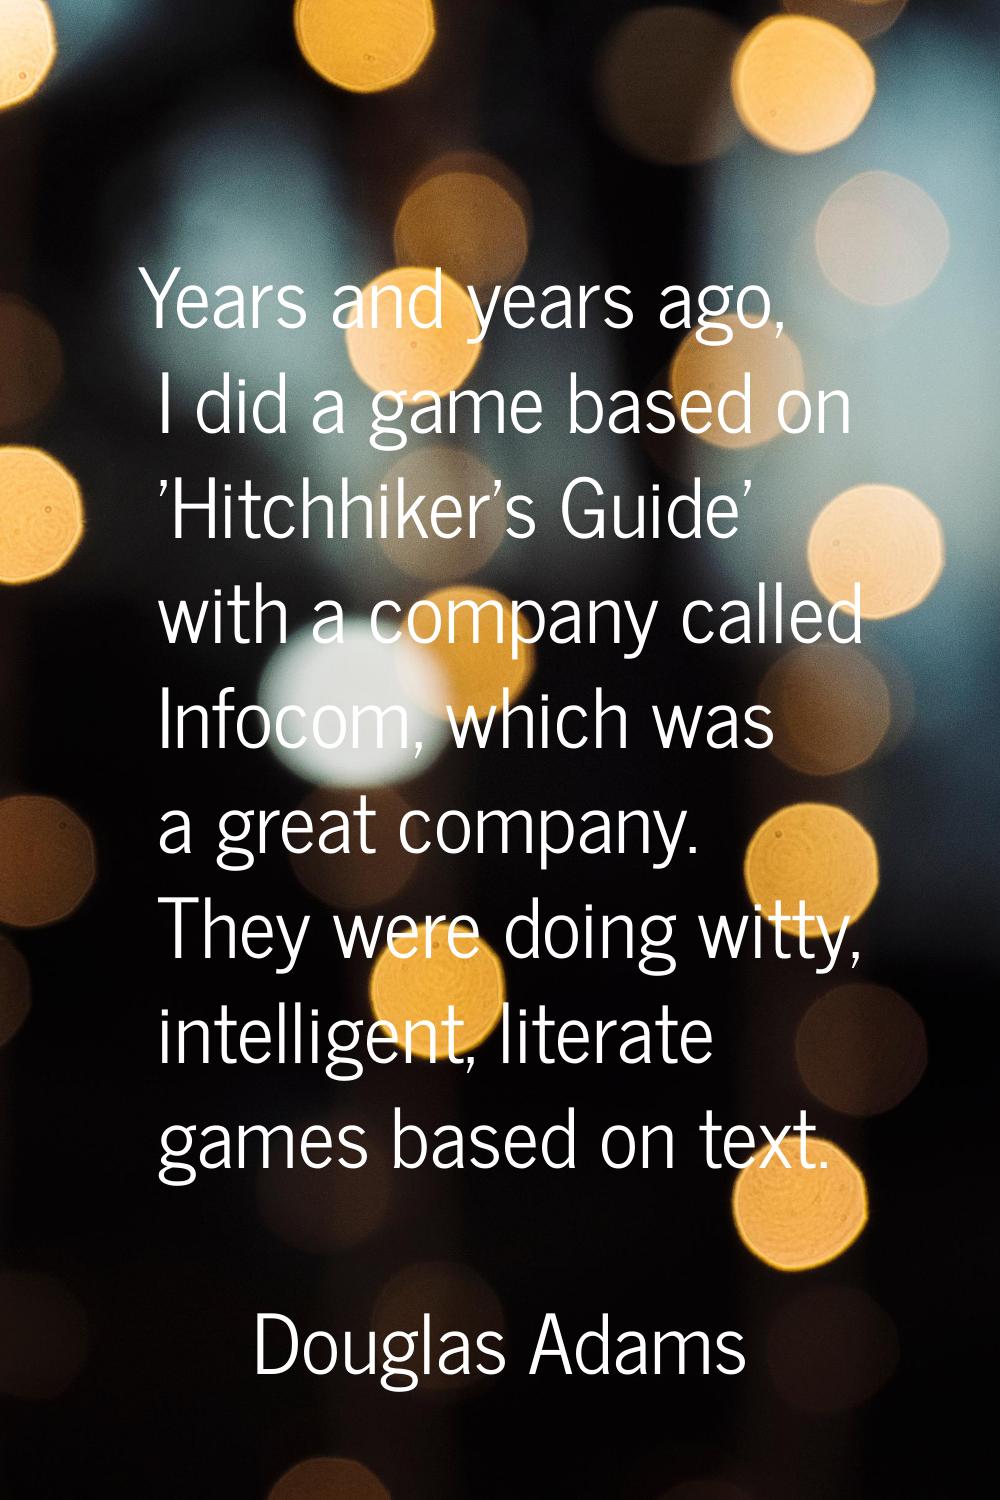 Years and years ago, I did a game based on 'Hitchhiker's Guide' with a company called Infocom, whic